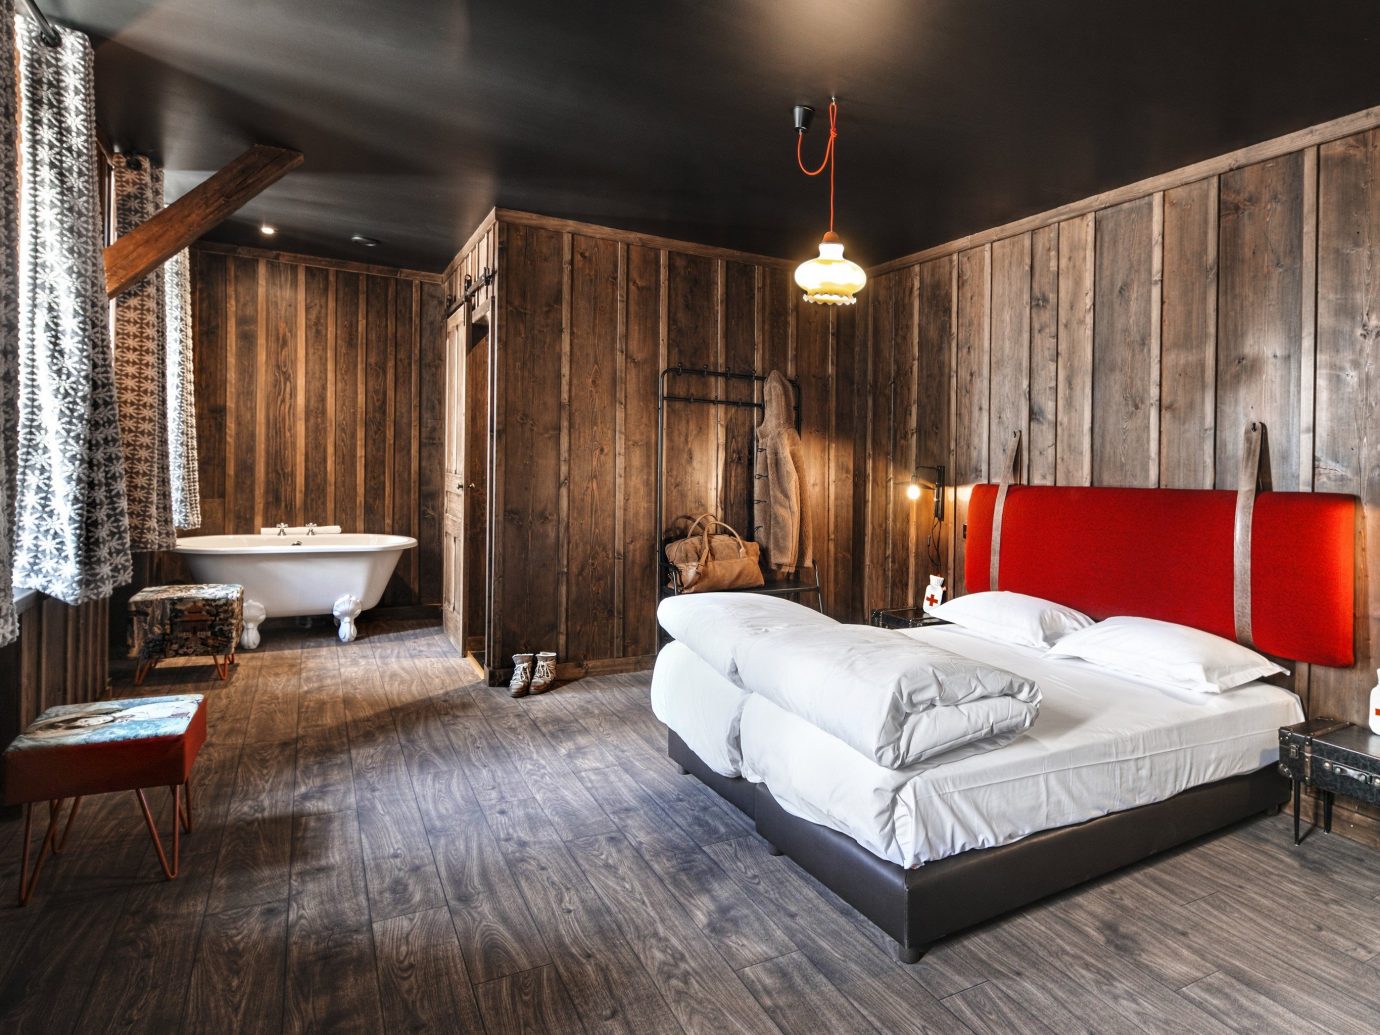 Boutique Hotels Hotels Outdoors + Adventure Winter indoor floor bed room interior design ceiling Architecture wall Suite Bedroom wood bed frame hotel flooring furniture interior designer